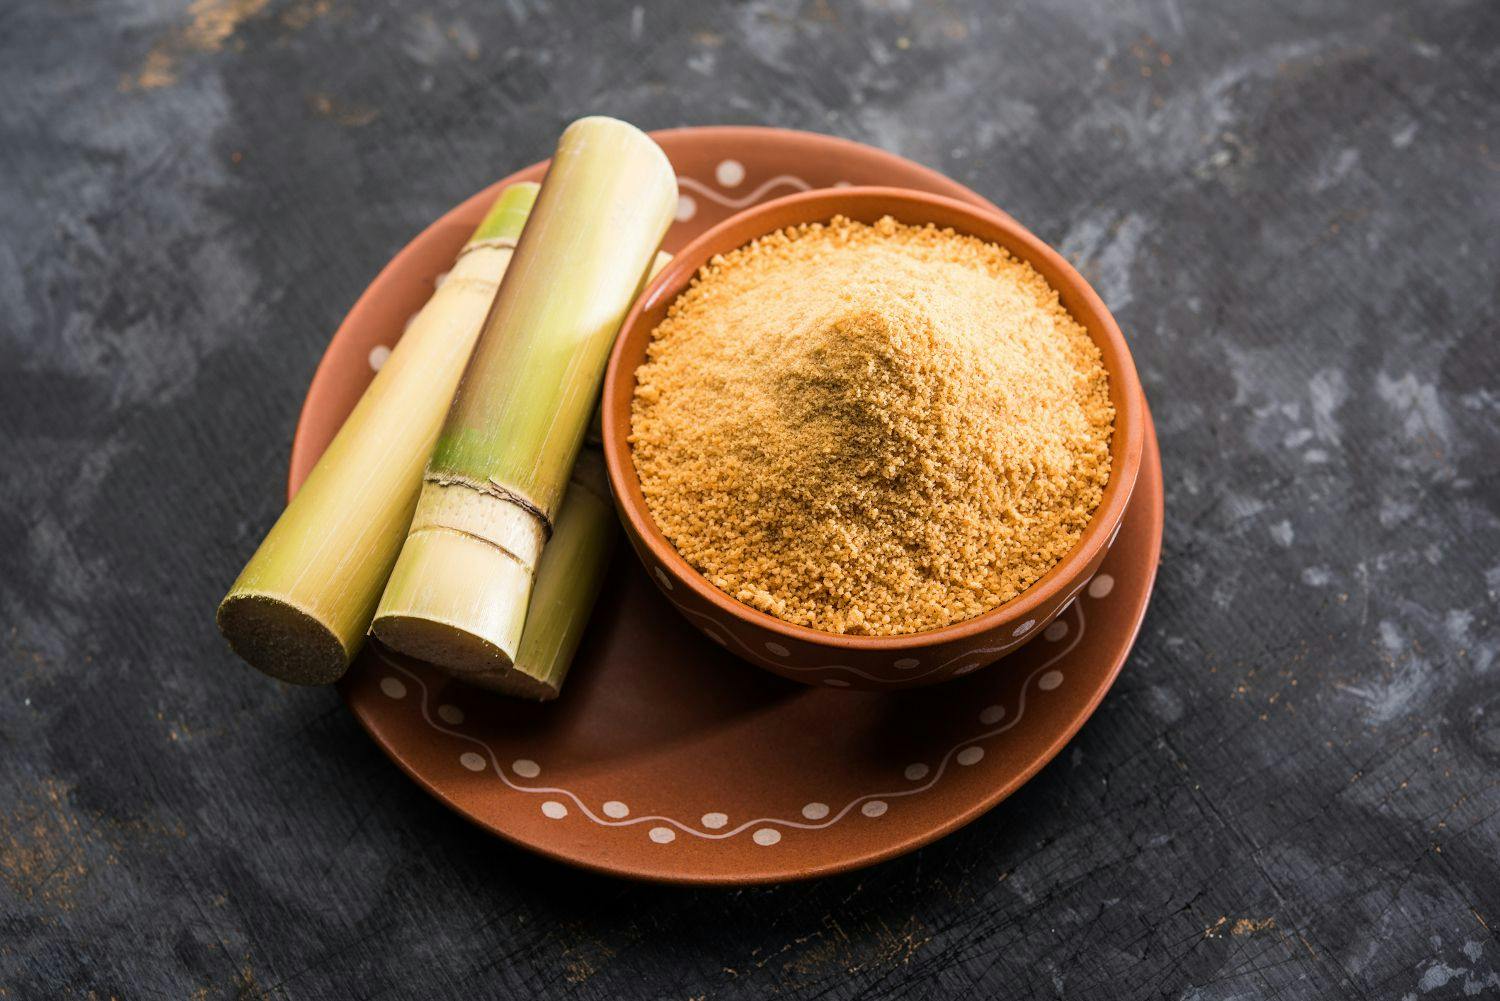 International Molasses launches CaneRite Panela, a nutrient-packed powder sweetener